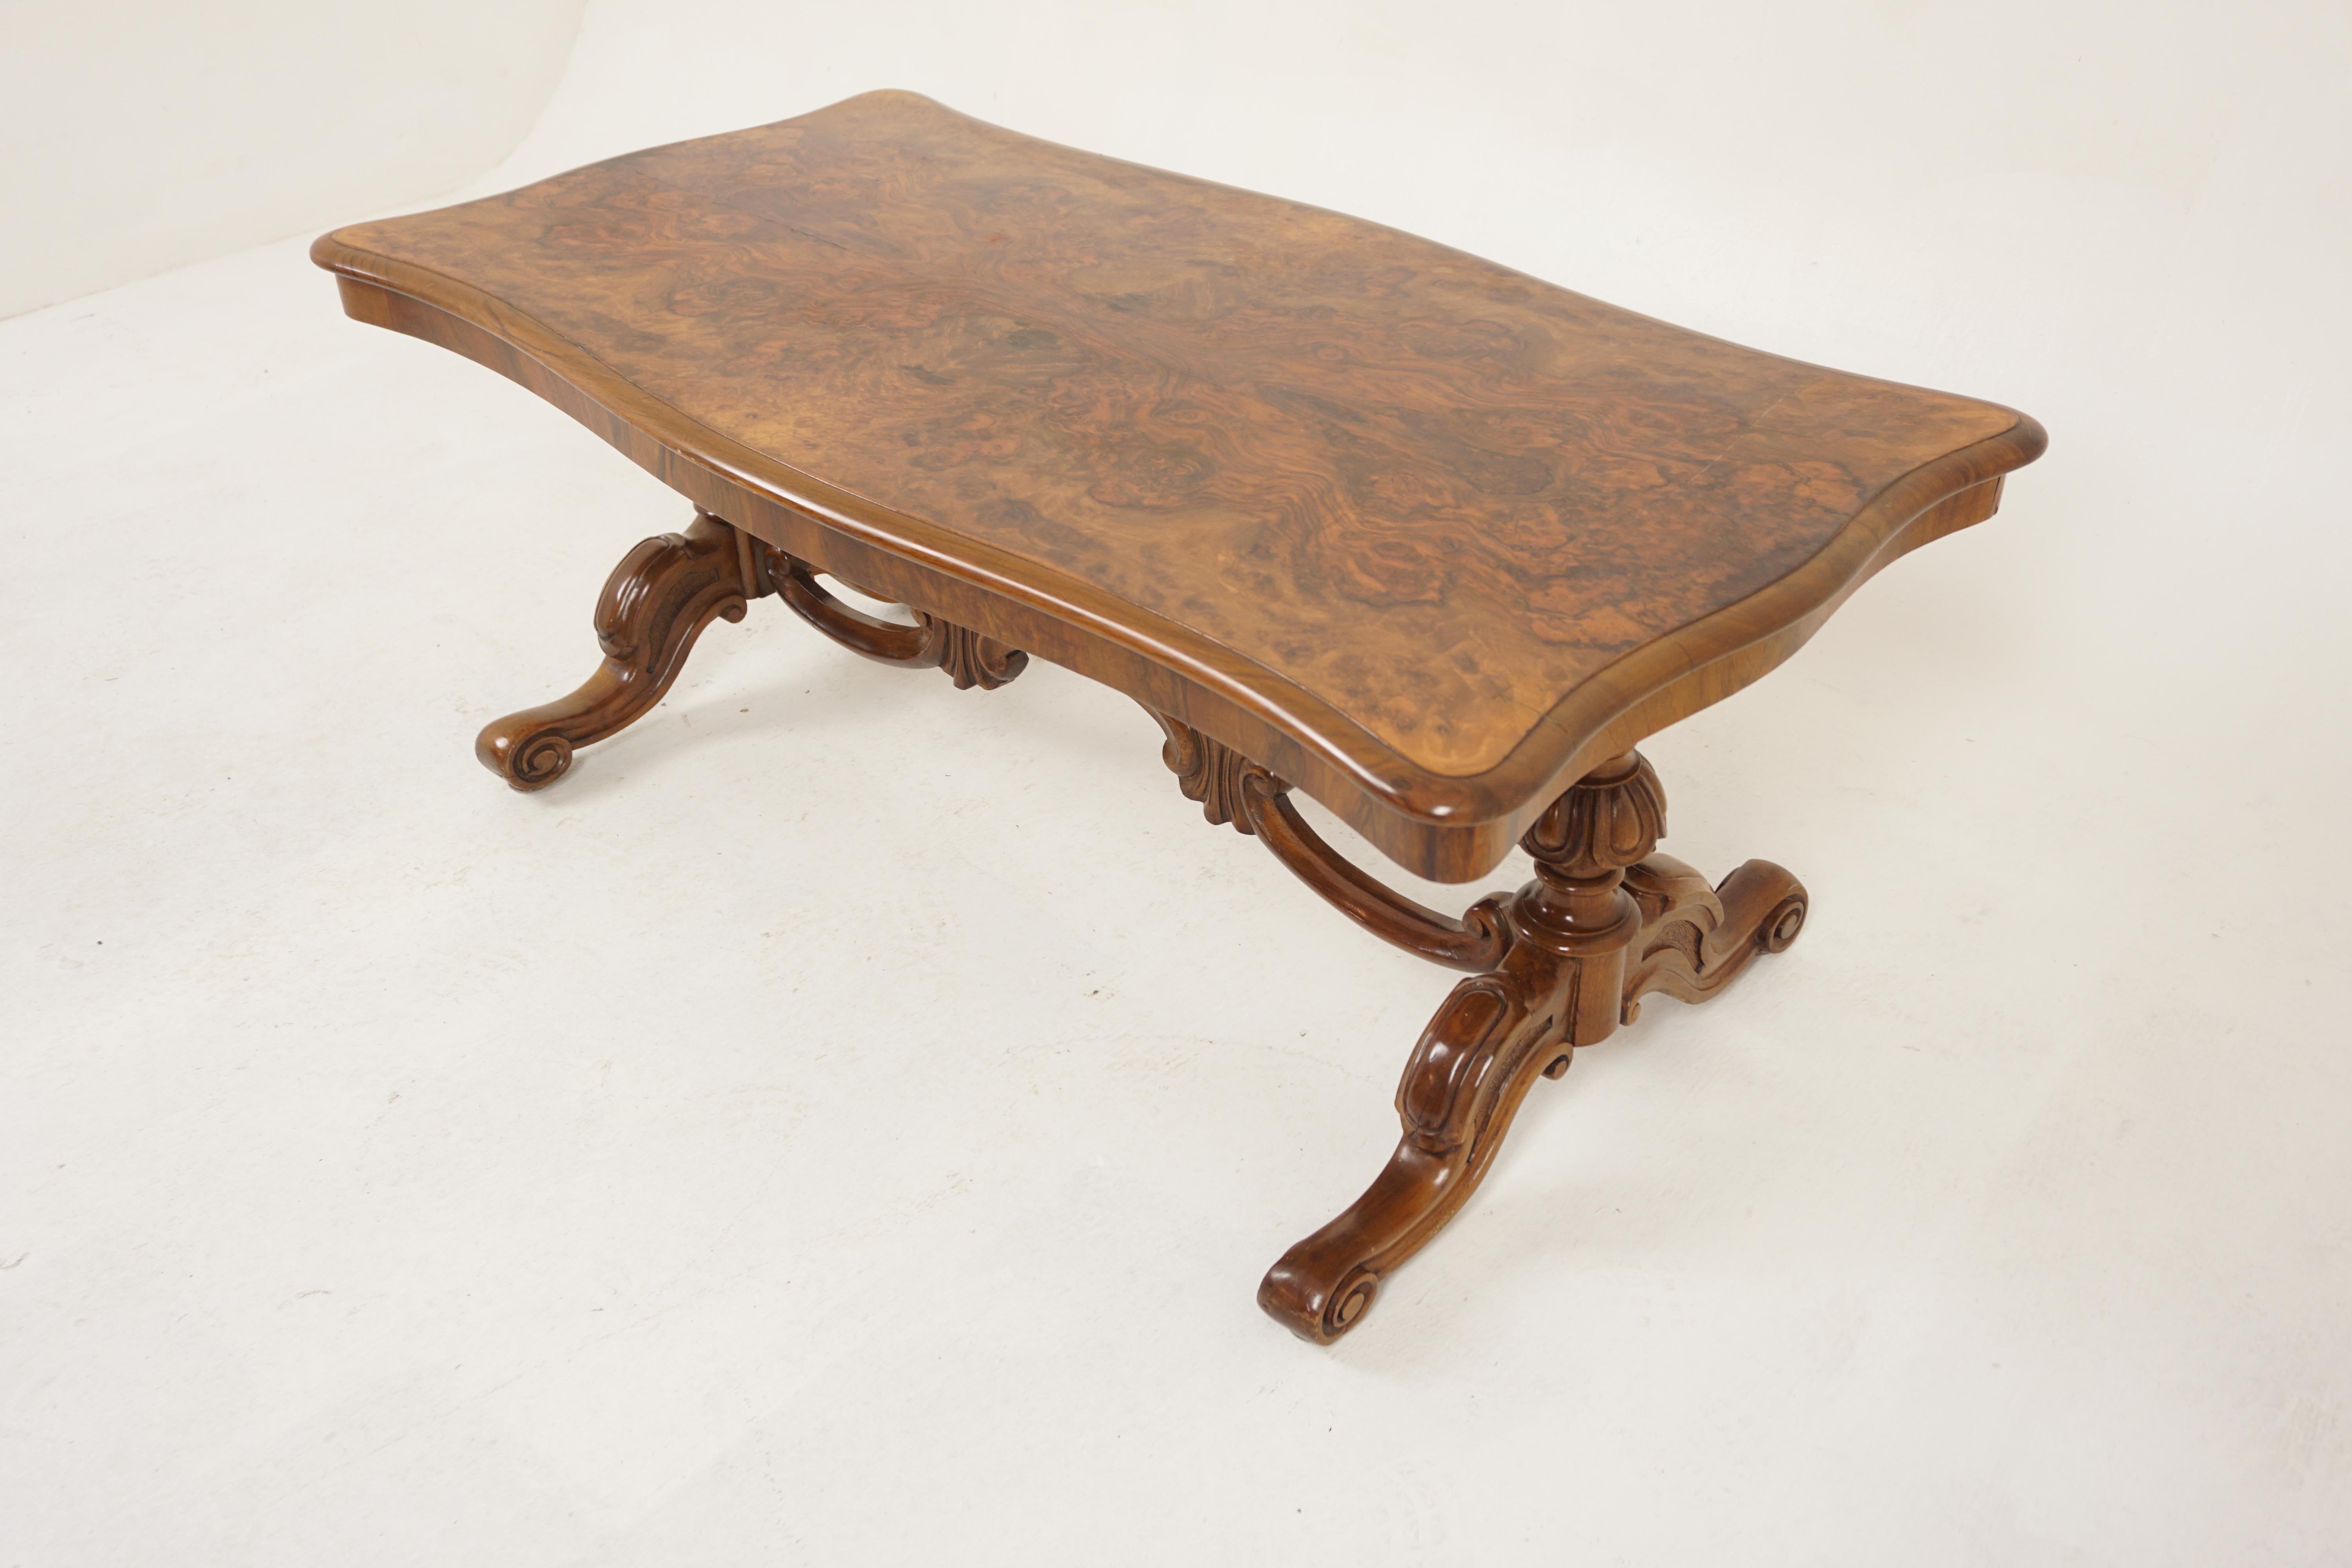 Antique Victorian Burr Walnut Coffee Table, Scotland 1870, H1188

Solid walnut and veneer
Original finish
Rectangular top with shaped sides and ends
Book matched burr walnut veneers
Stretcher form base with well carved cross stretcher
All raised on